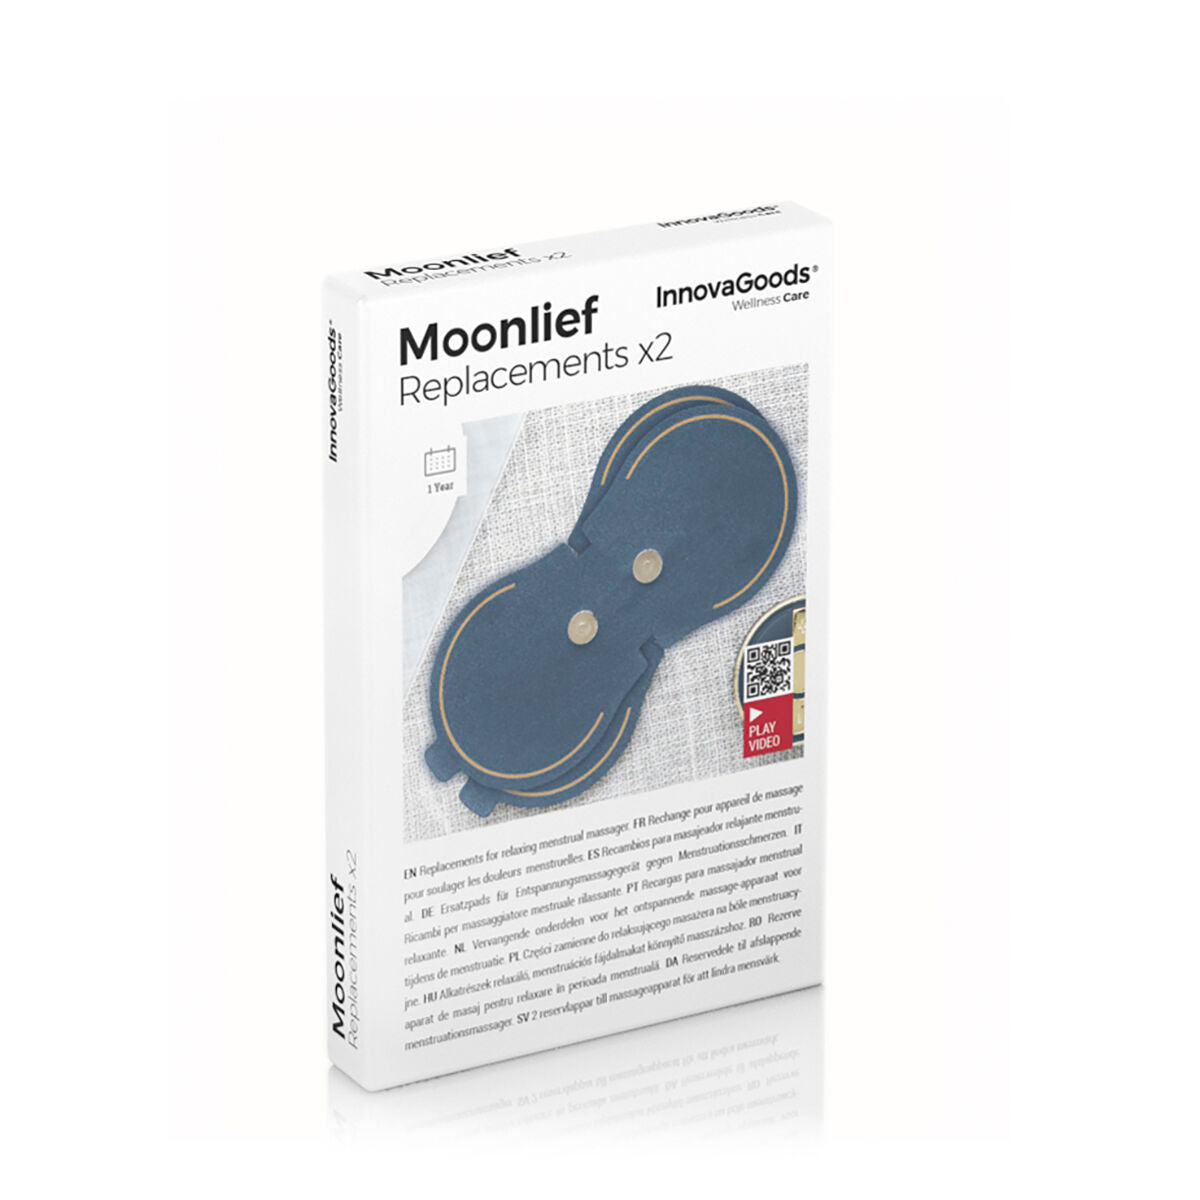 Replacement Patches for the Relaxing Menstrual Massager Moonlief InnovaGoods (Pack of 2) - Calm Beauty IE